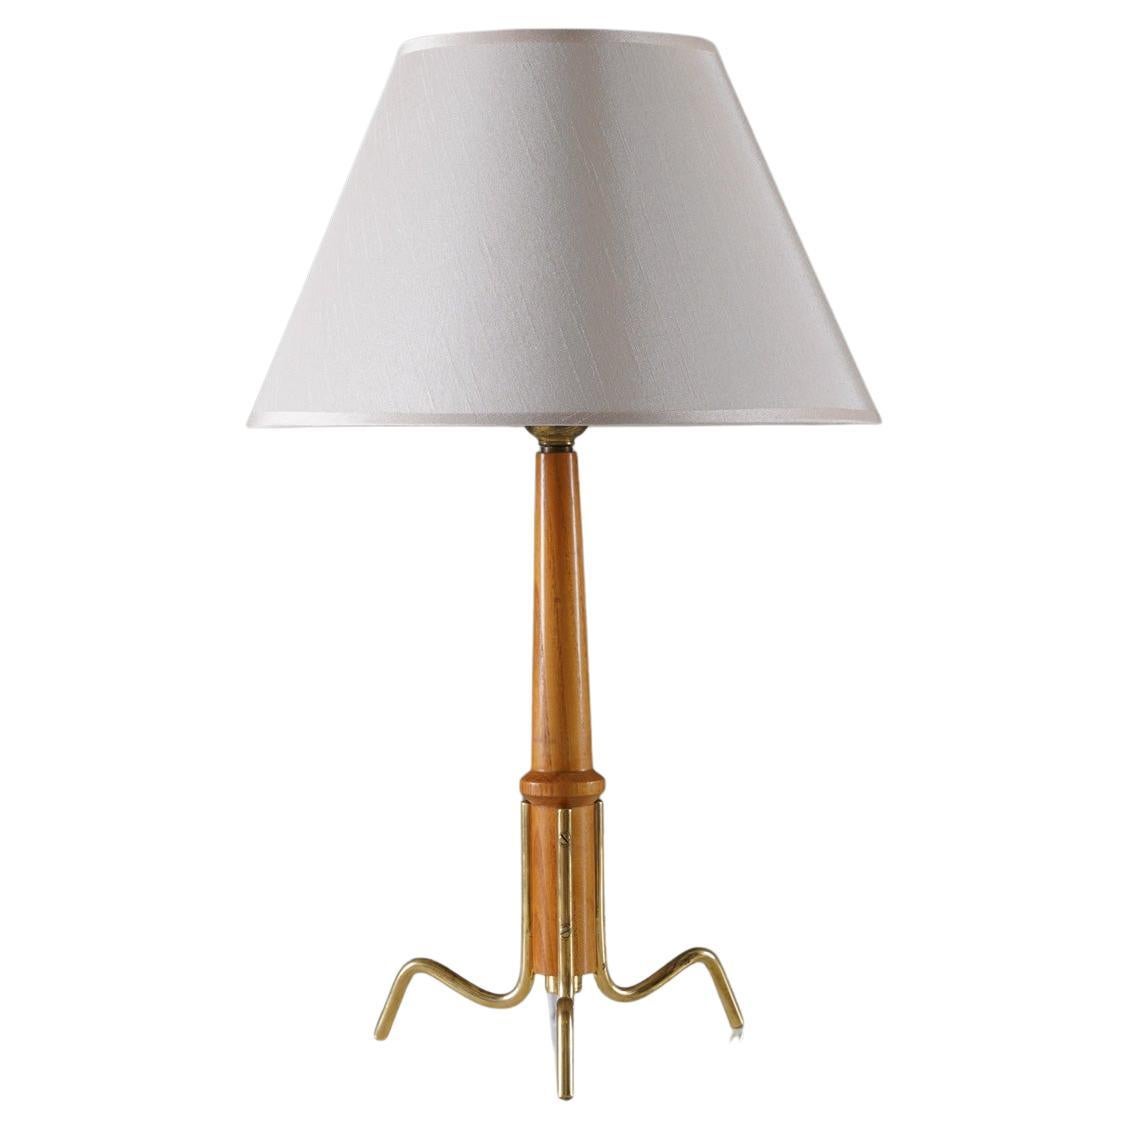 Scandinavian Mid-Century Table Lamp by Böhlmarks in Brass and Elm